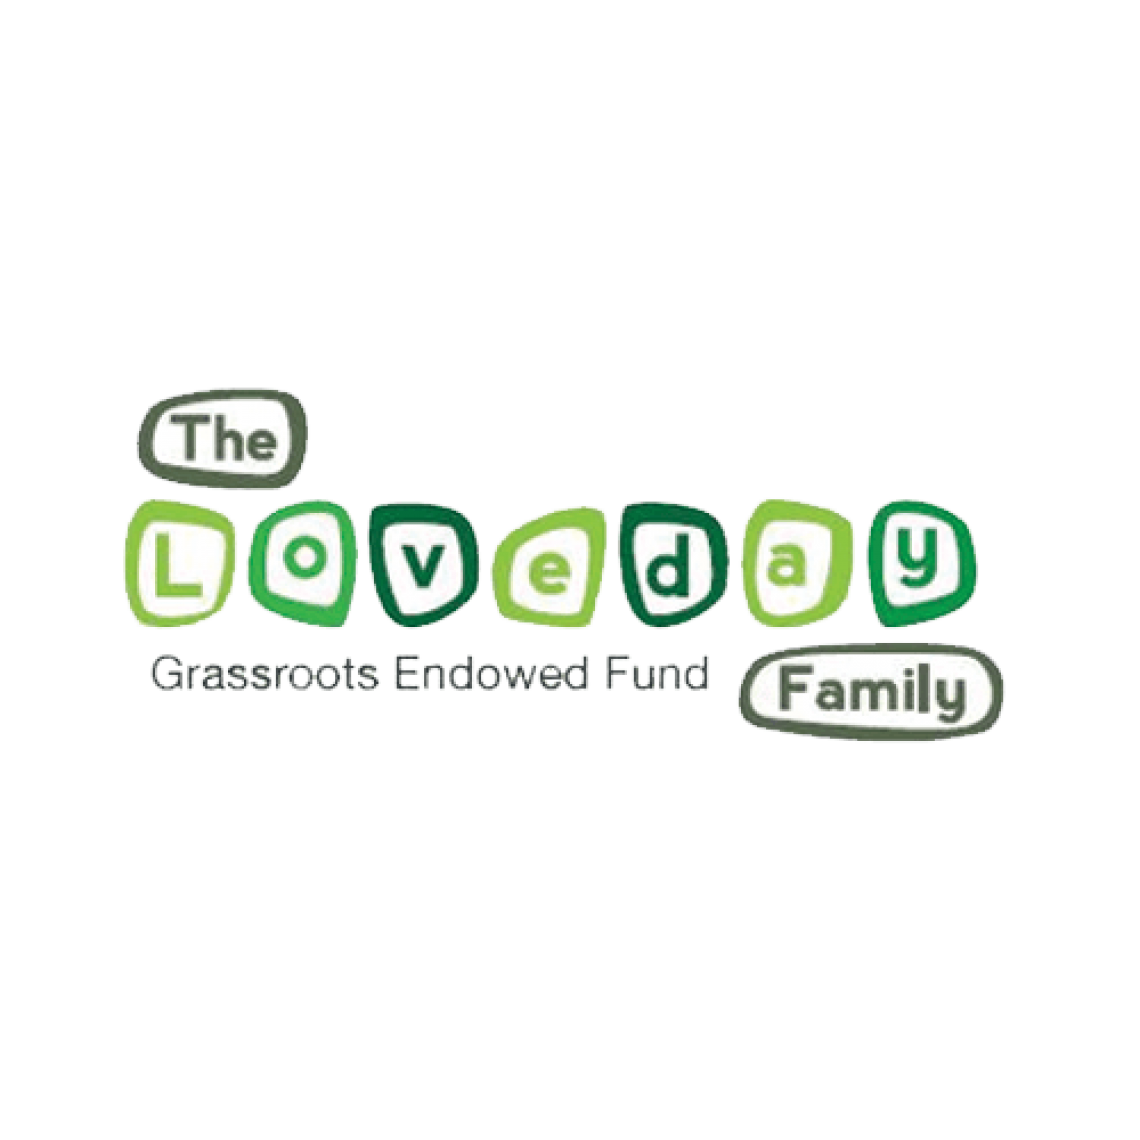 The Loveday Family Grassroots Endowment Fund logo